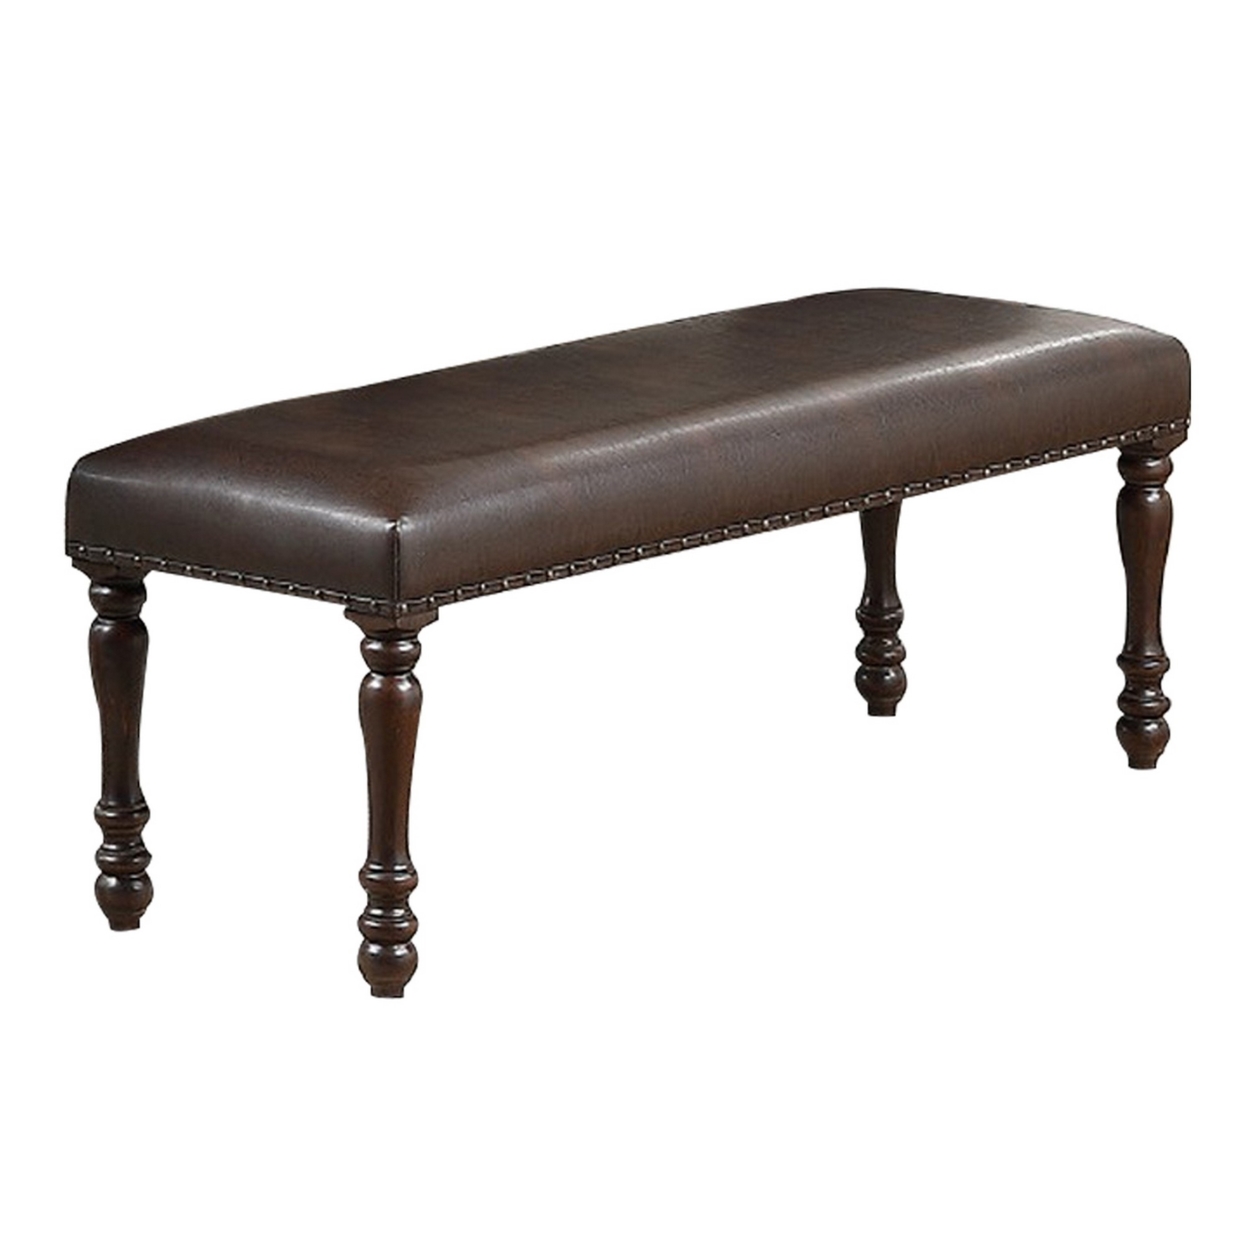 Nailhead Trim Faux Leather Dining Bench With Turned Legs, Brown- Saltoro Sherpi